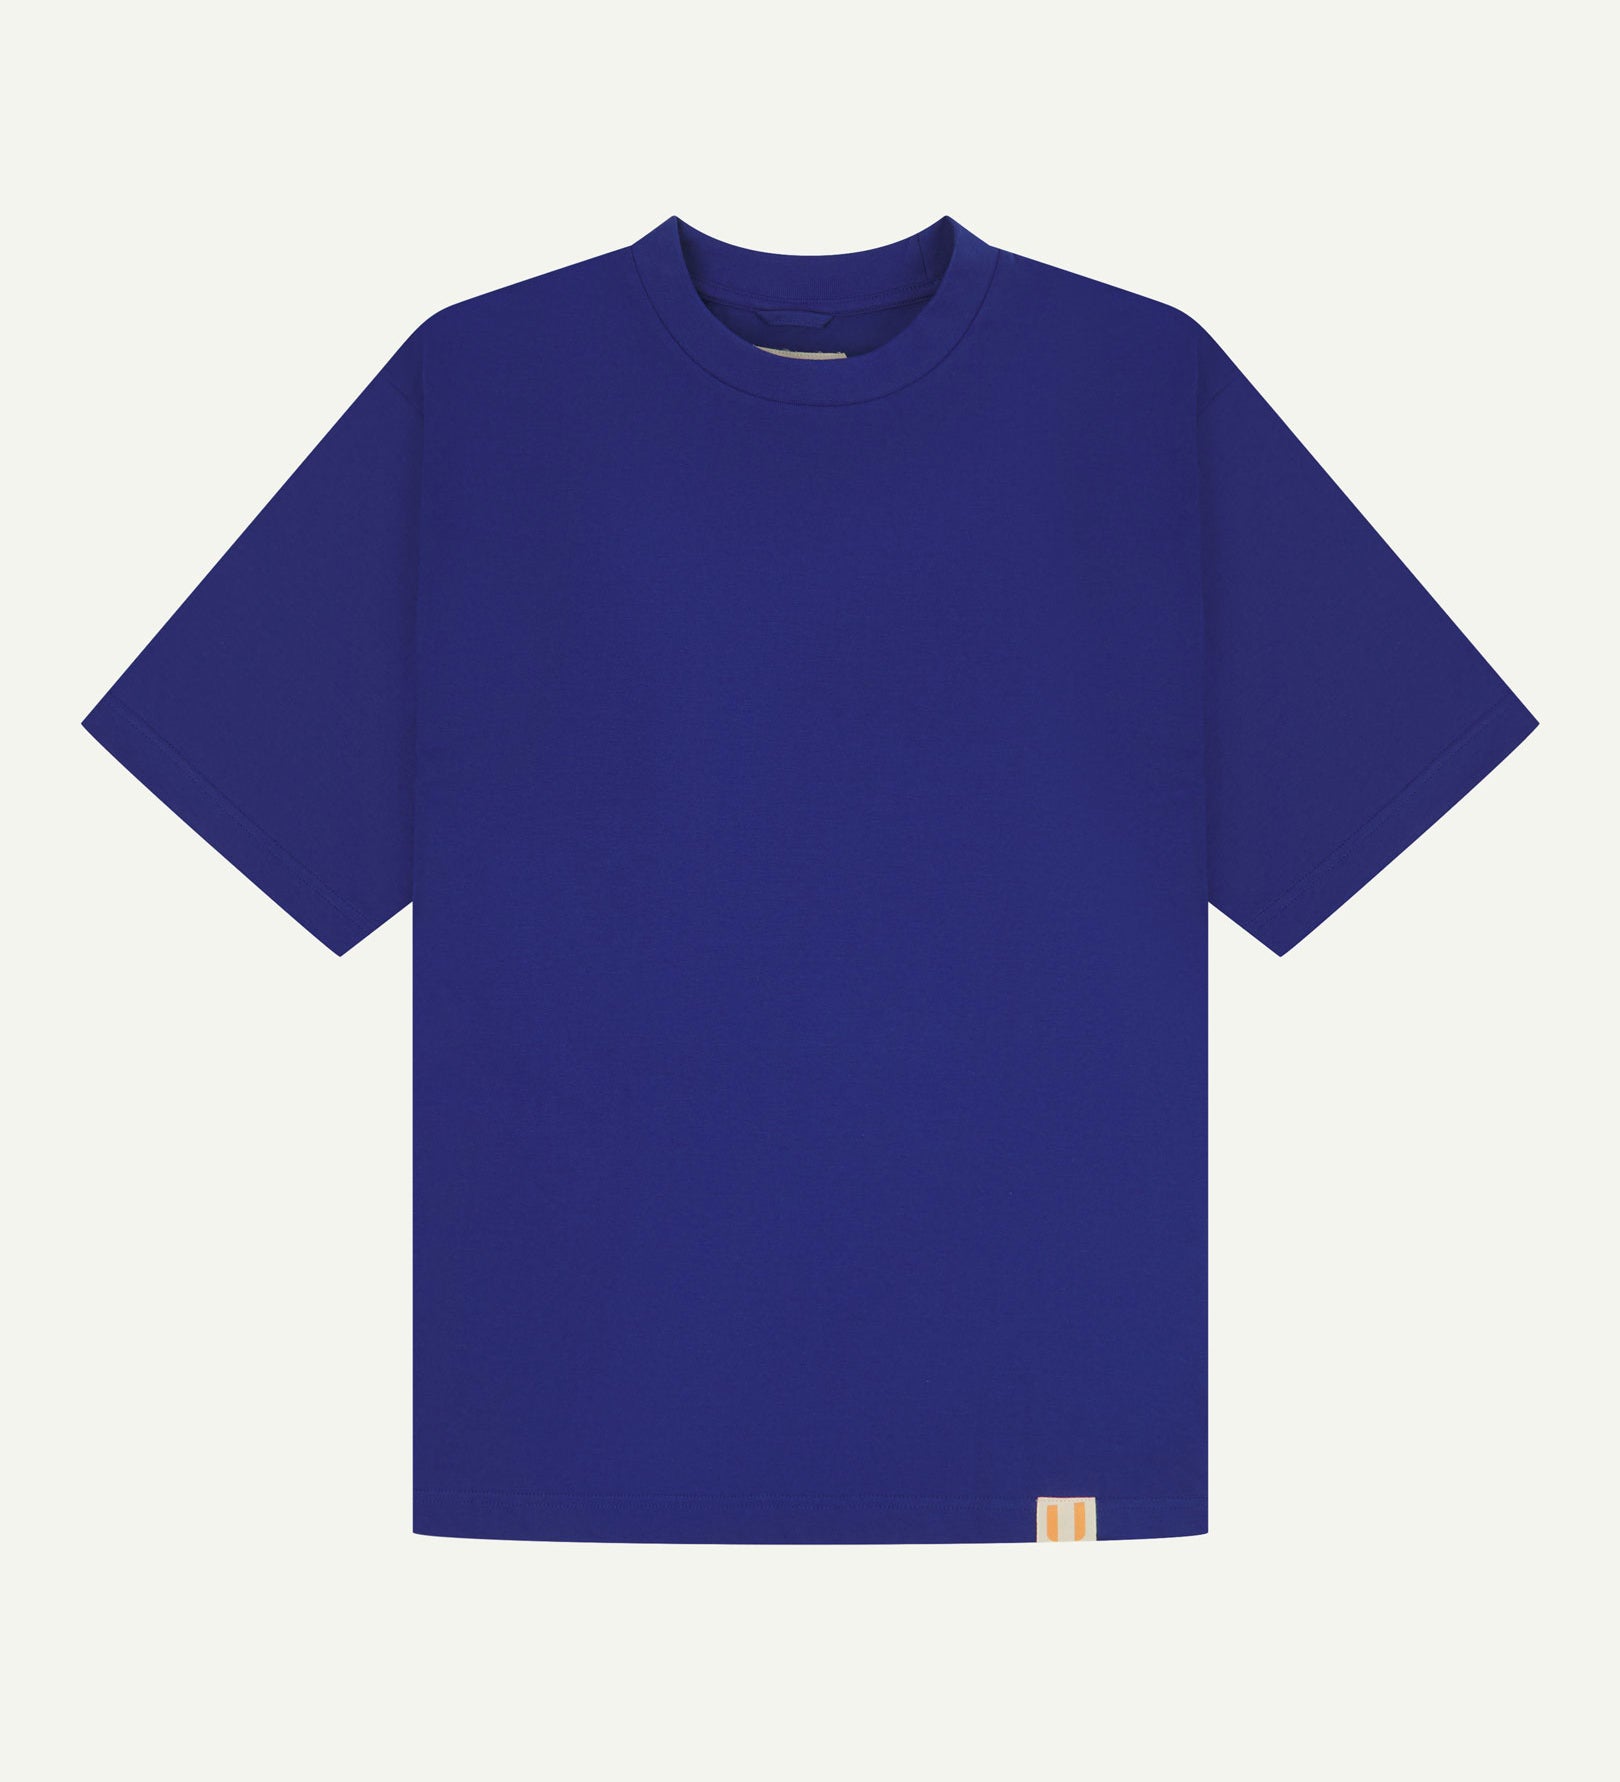 Full flat view of ultra blue, organic cotton, oversized T-shirt from Uskees.